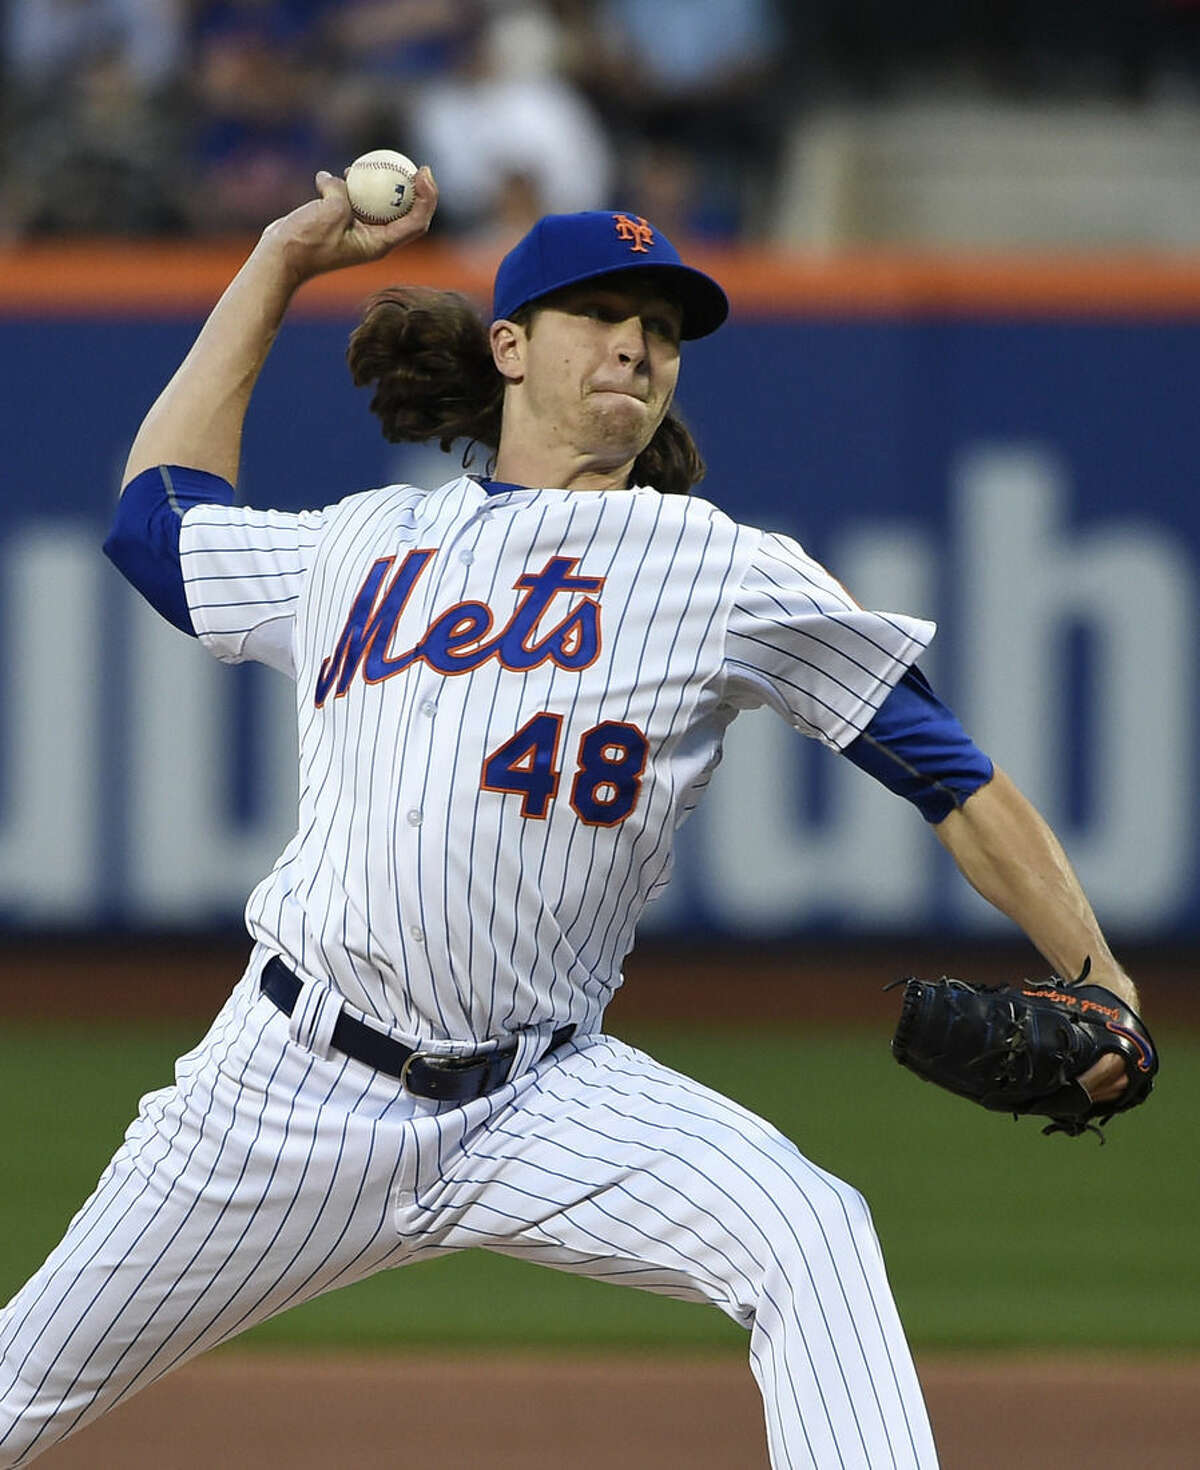 New York Mets starter Jacob deGrom (48) pitches in the first inning of a baseball game against the Miami Marlins at Citi Field on Saturday, April 18, 2015, in New York. (AP Photo/Kathy Kmonicek)